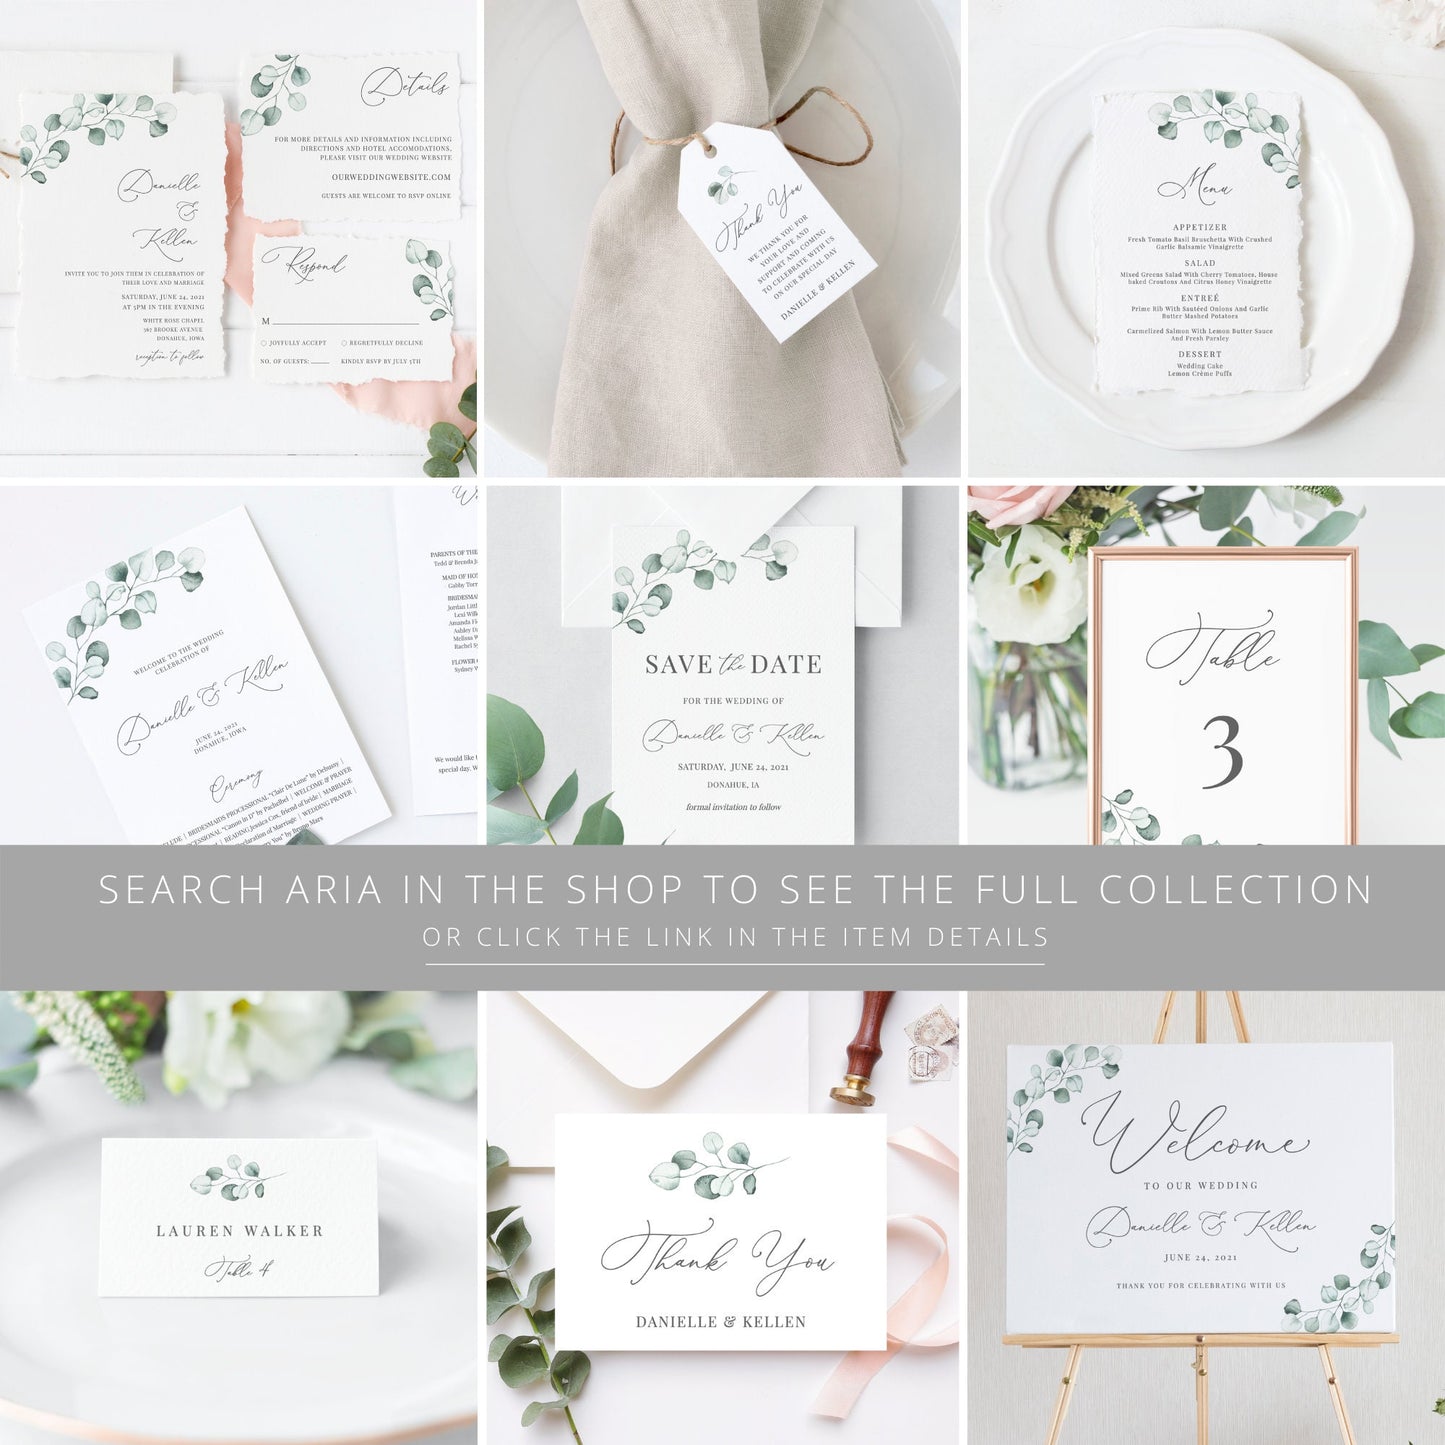 Editable Eucalyptus Wedding Thank You Cards Greenery Cards Personalized Thank You Cards Template